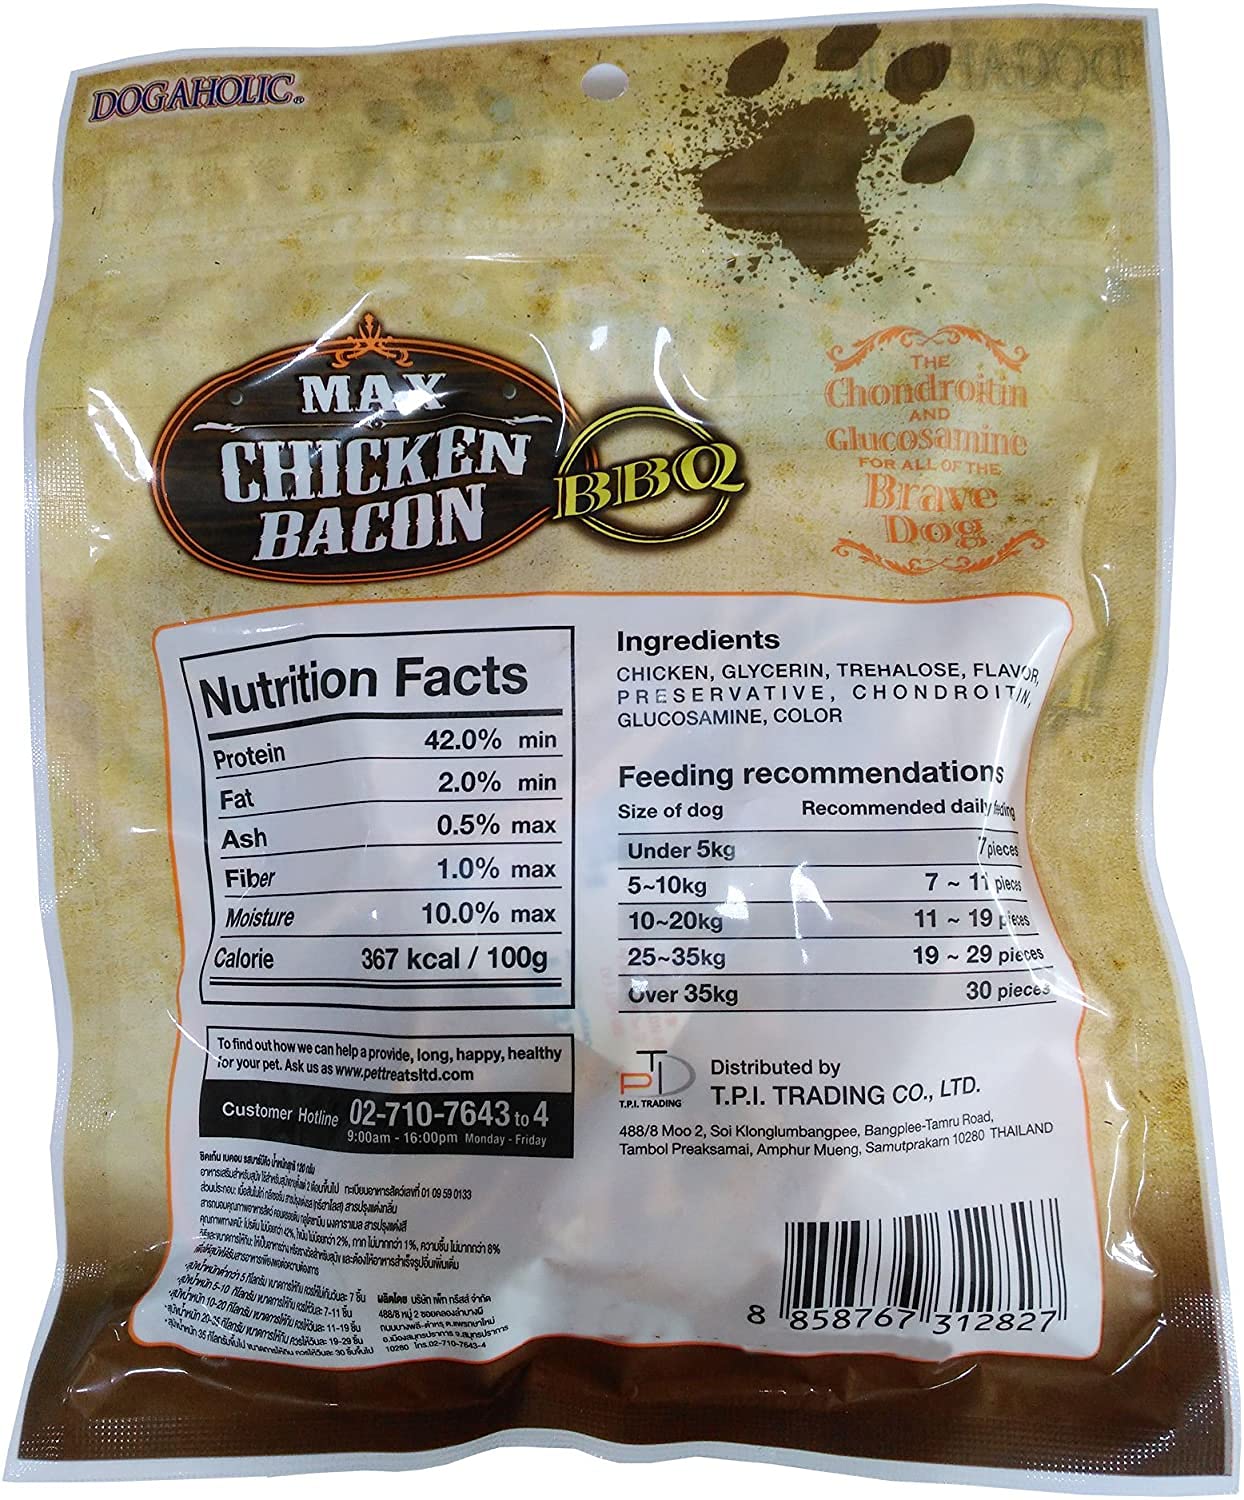 Dogaholic Chicken Bacon-Barbecue Flavour - 130g